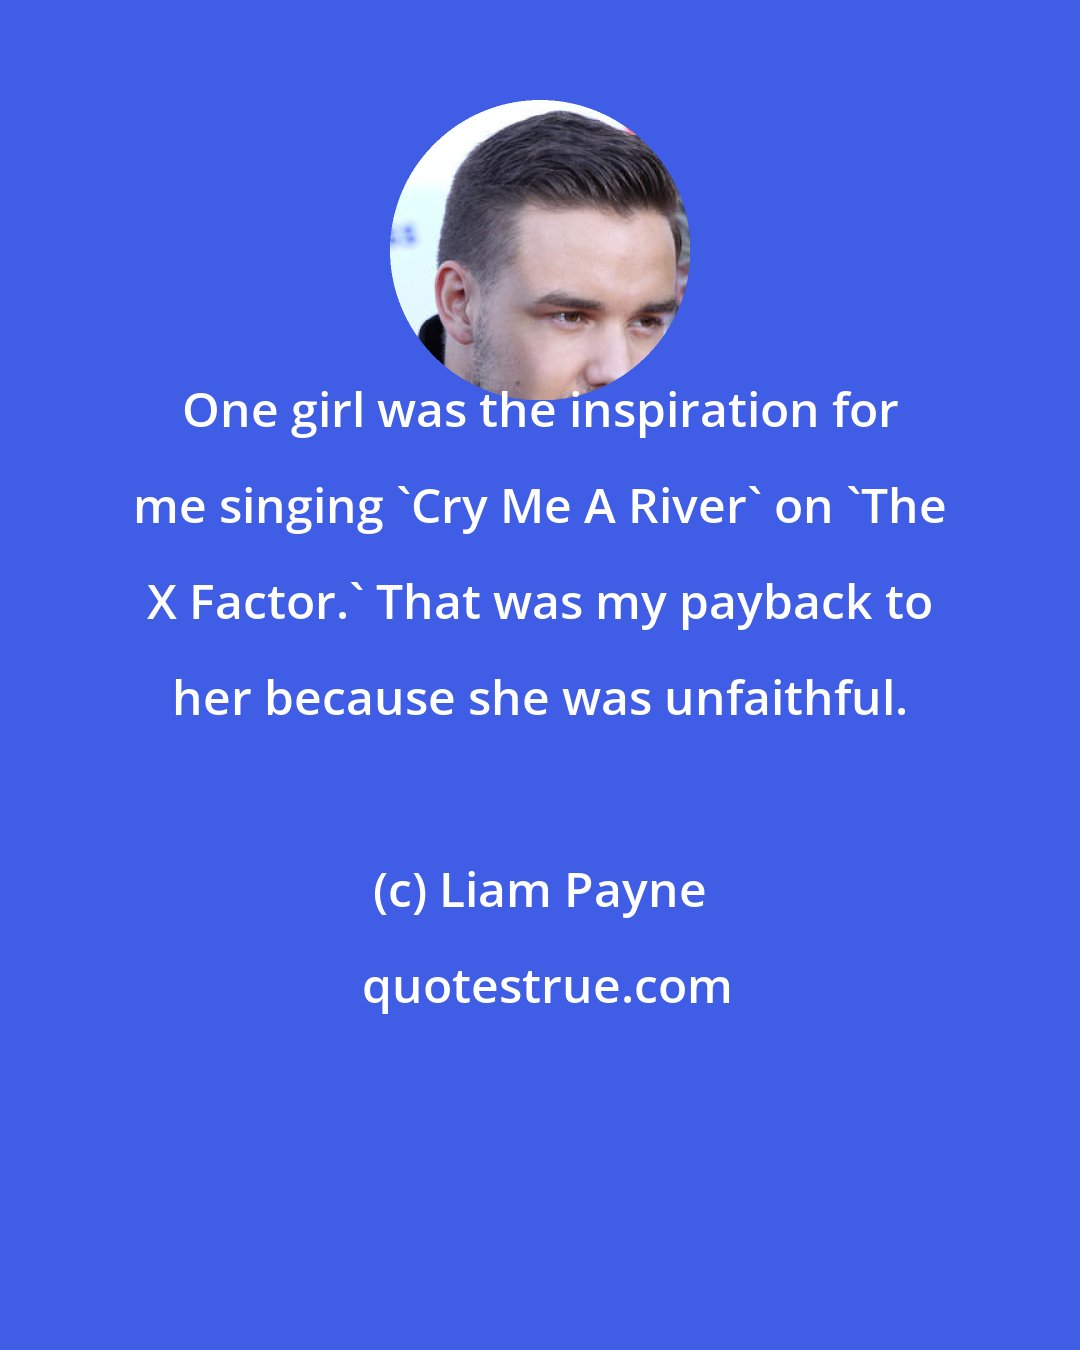 Liam Payne: One girl was the inspiration for me singing 'Cry Me A River' on 'The X Factor.' That was my payback to her because she was unfaithful.